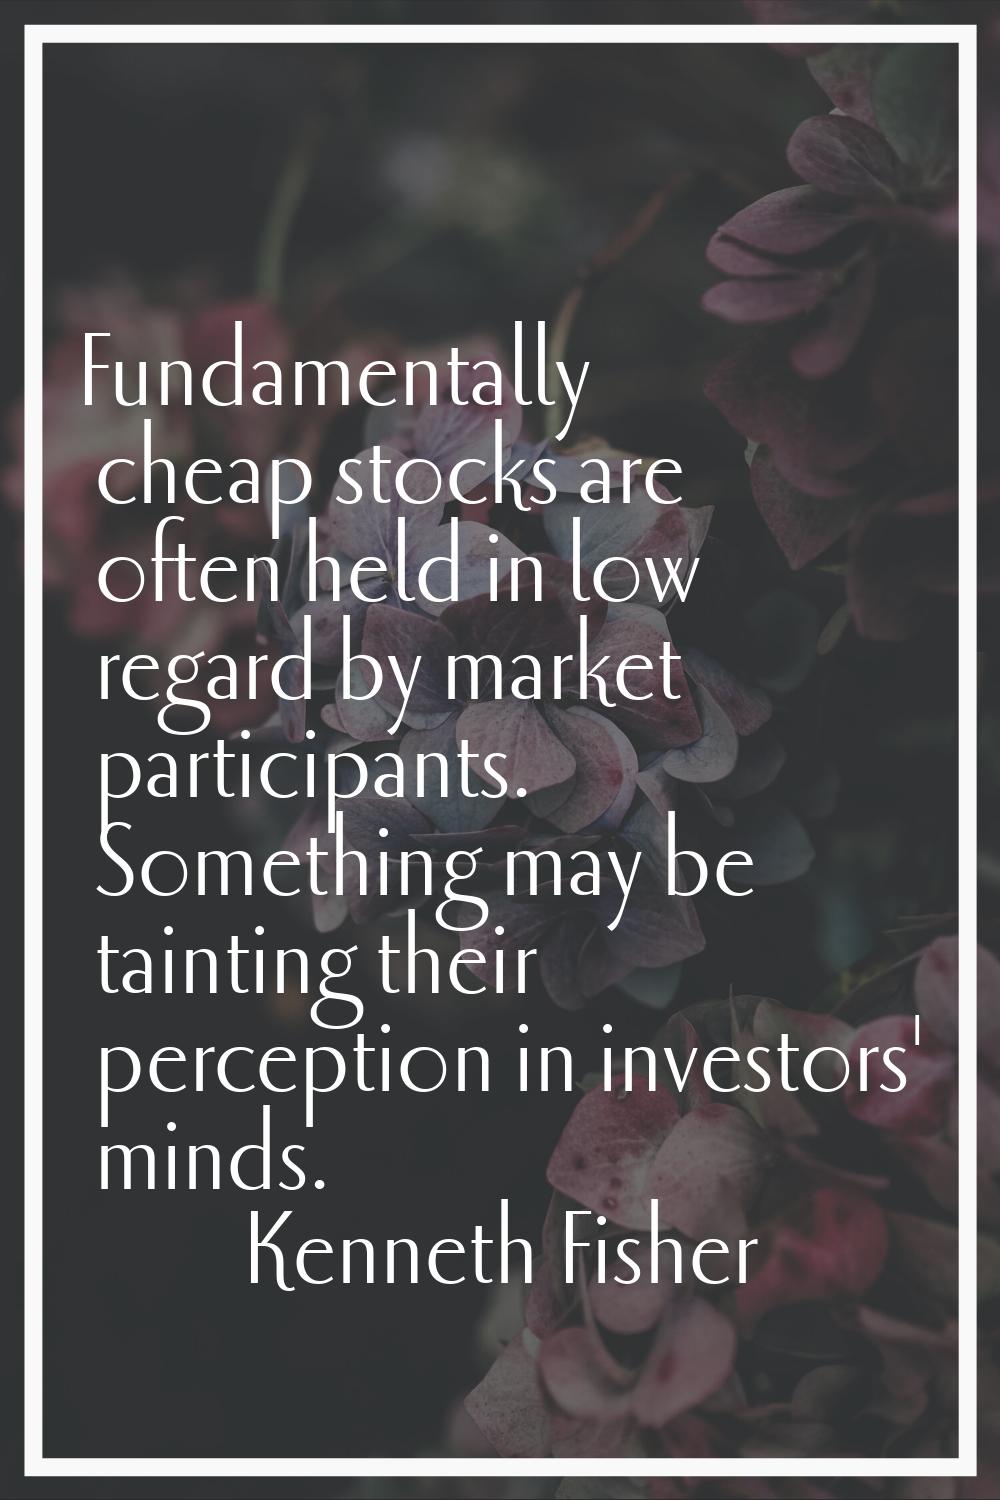 Fundamentally cheap stocks are often held in low regard by market participants. Something may be ta